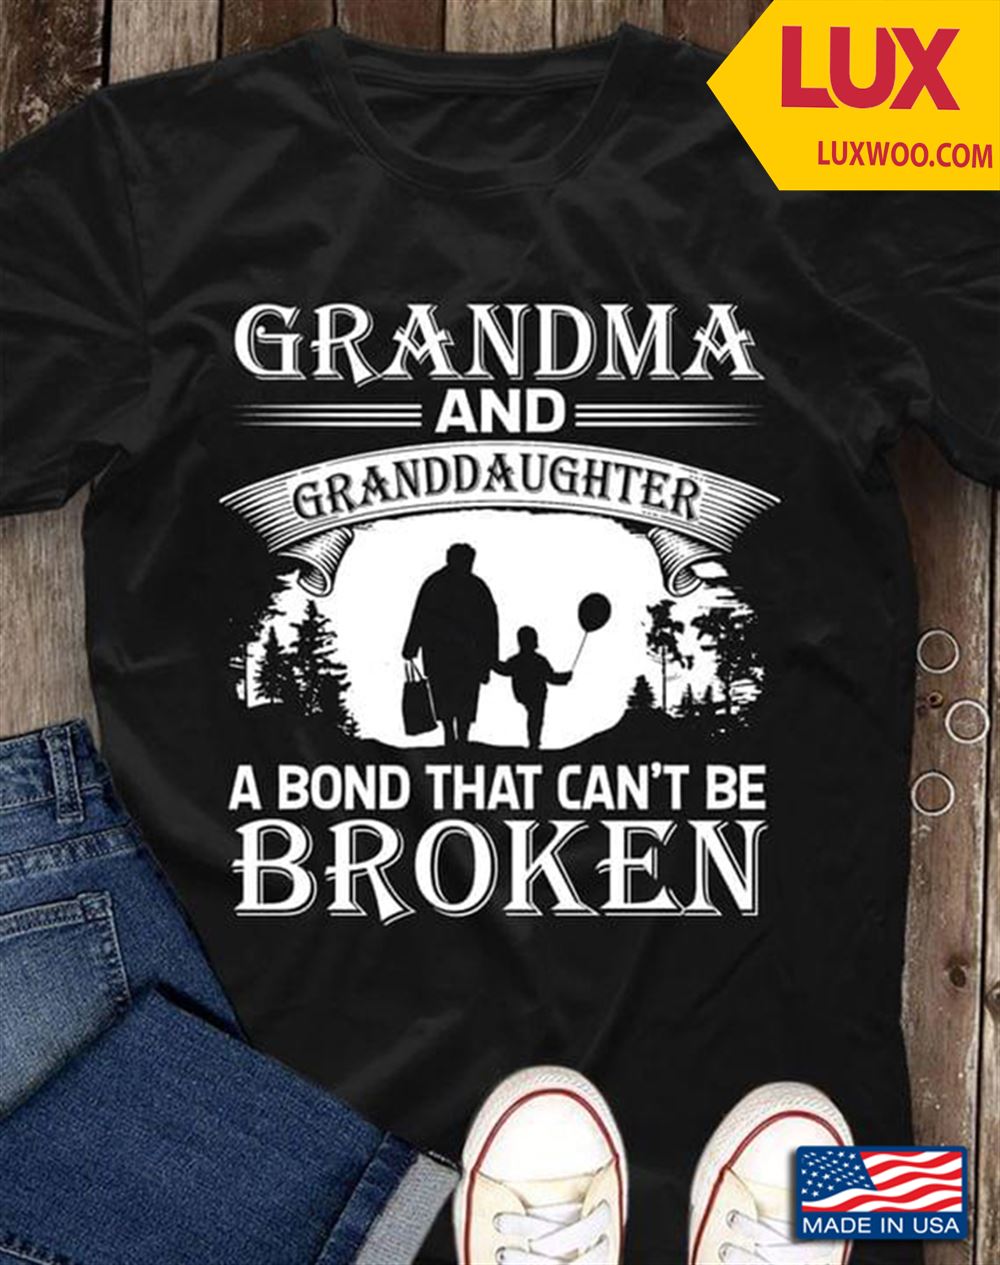 Grandma And Granddaughter A Bond That Cant Be Broken Tshirt Size Up To 5xl